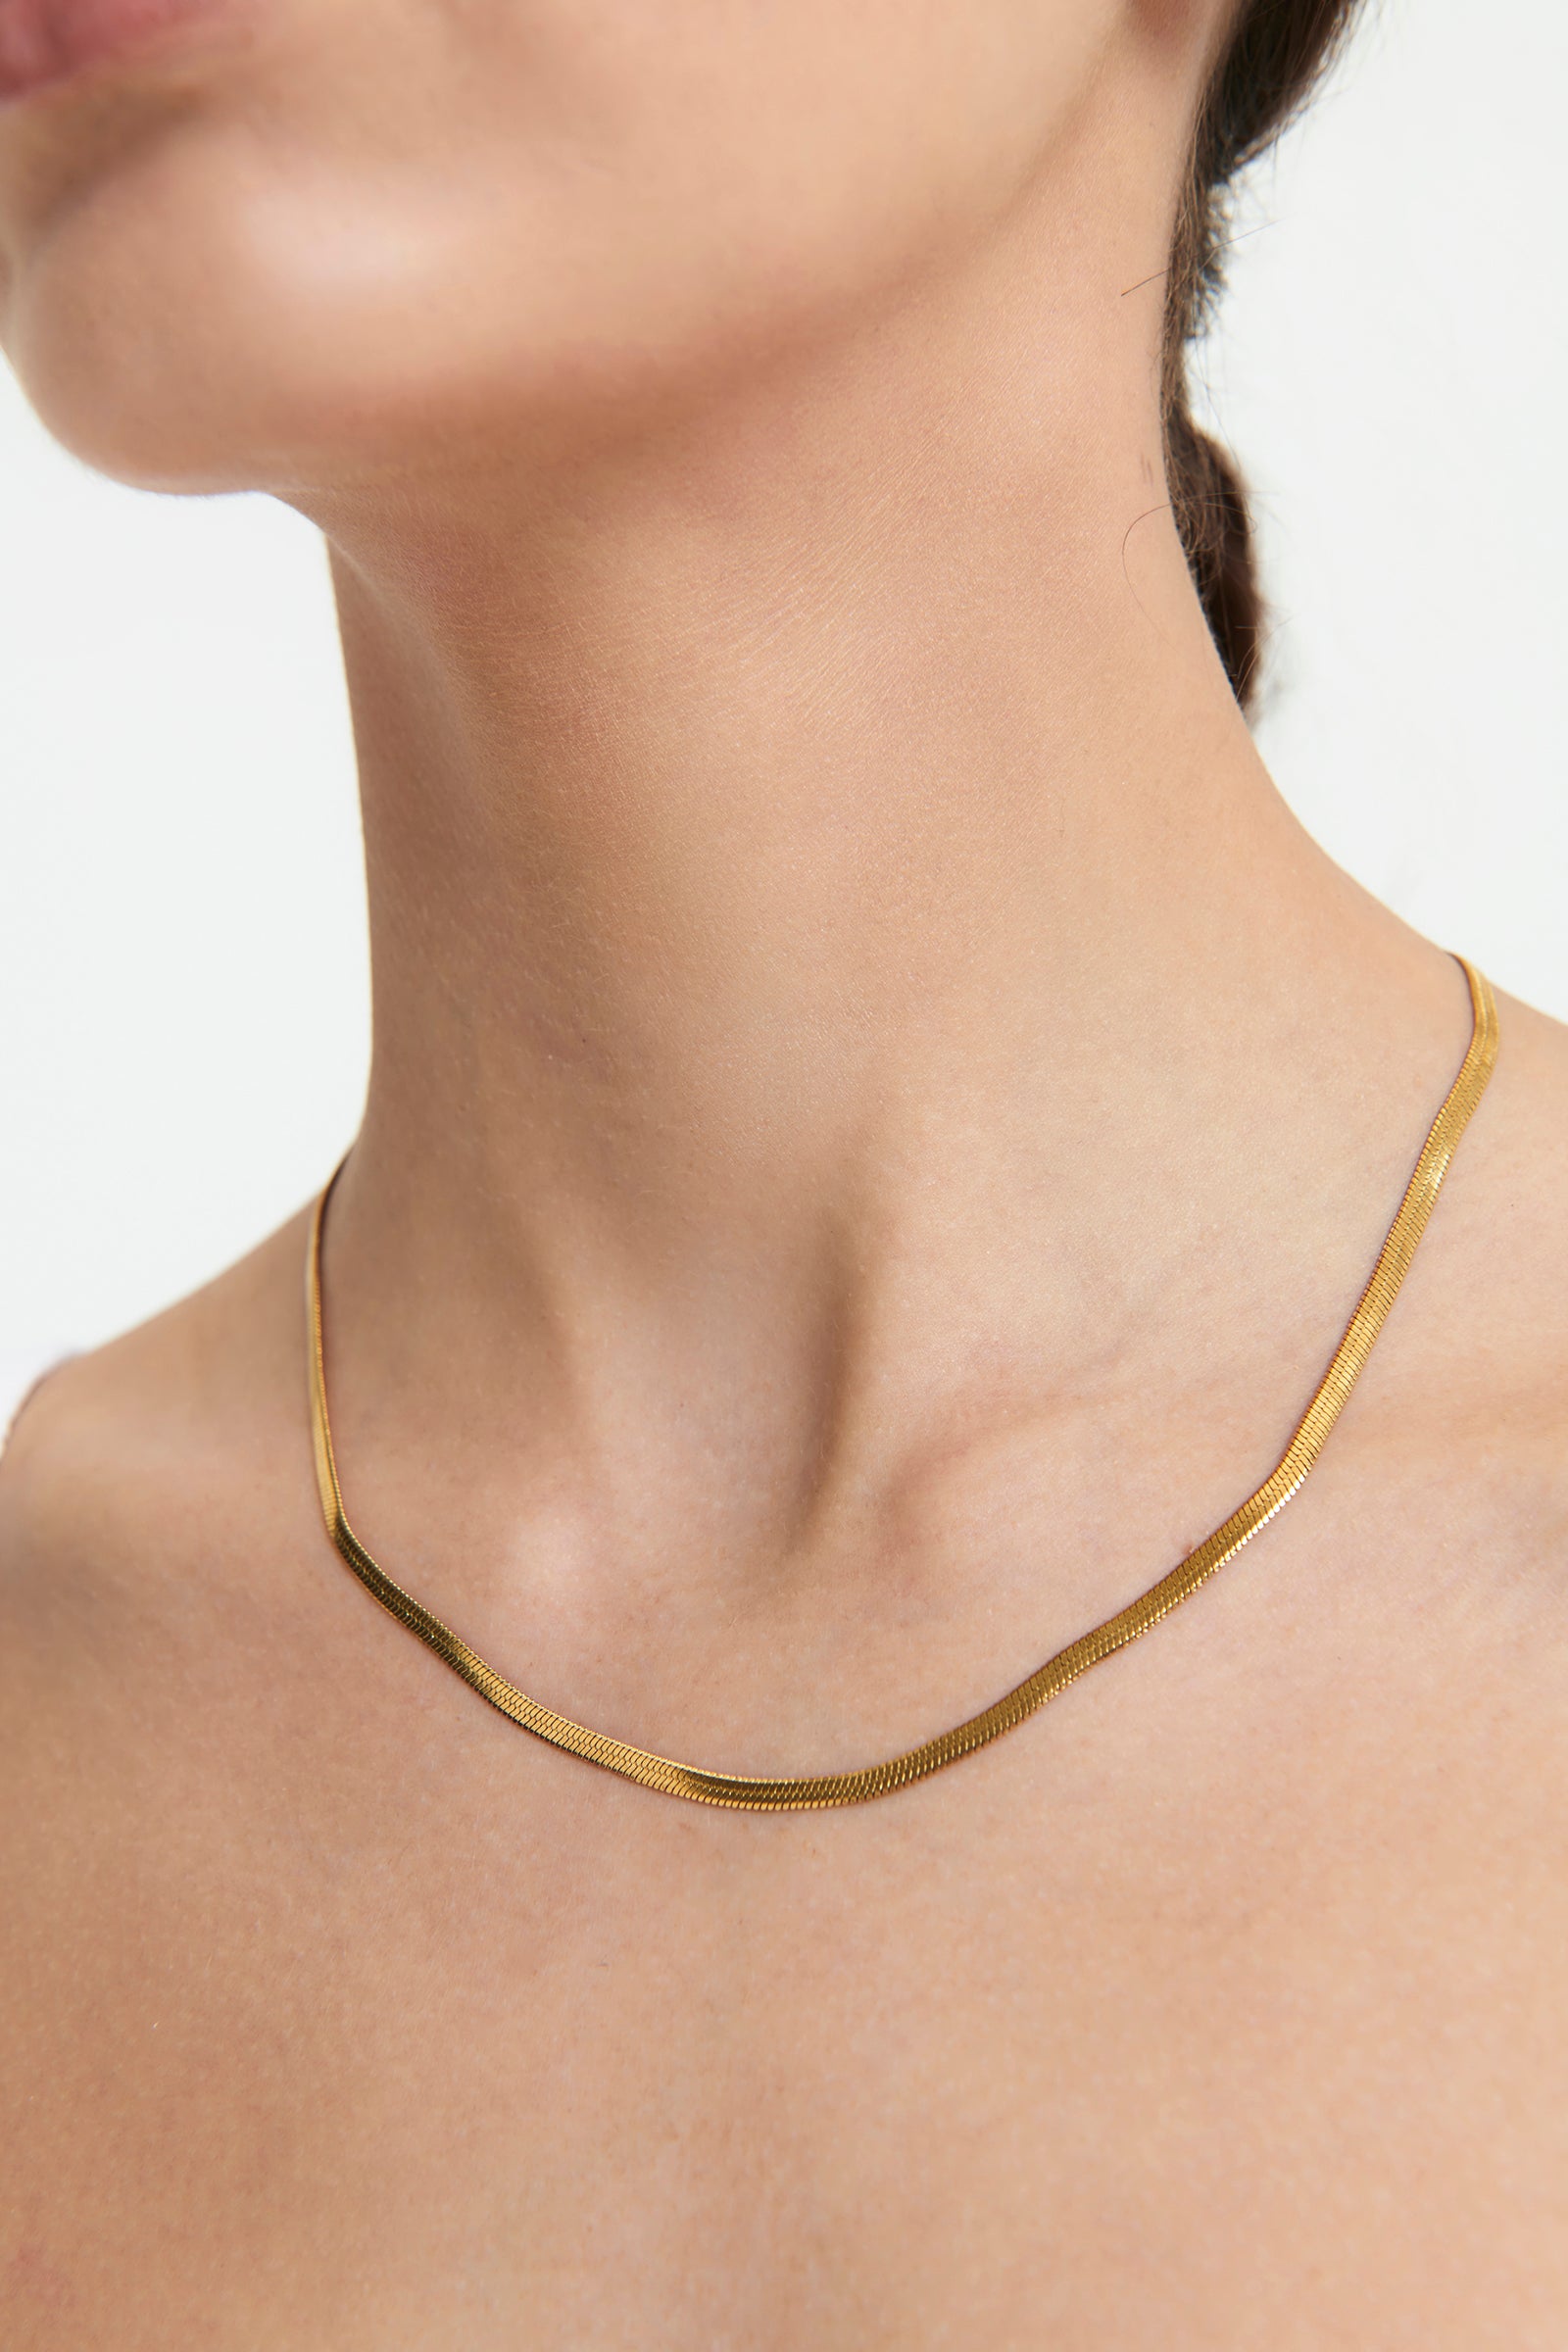 Nude Lucy Sphinx Snake Chain Mm in Gold